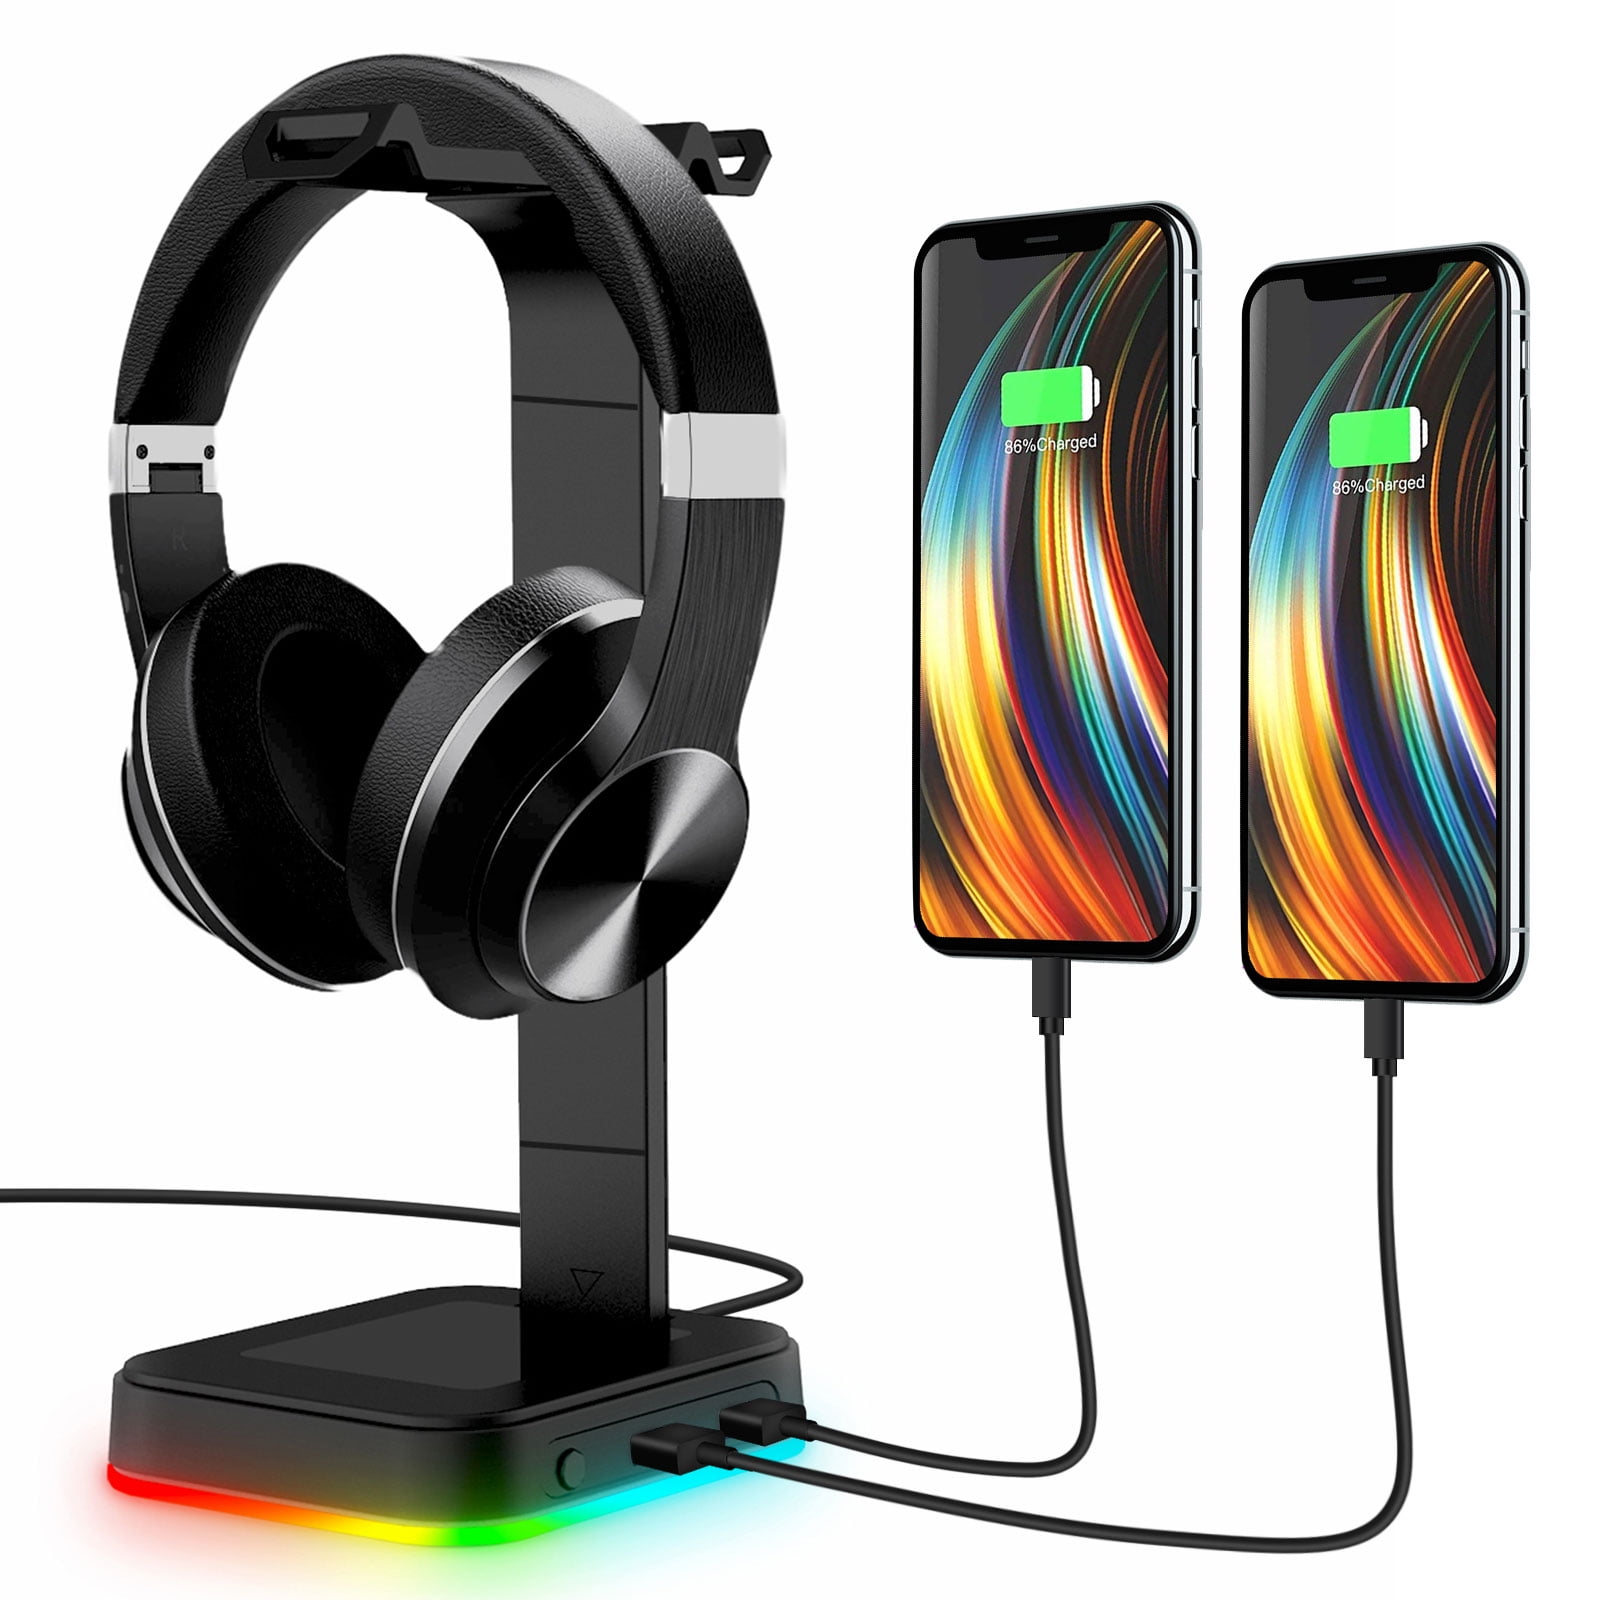 RGB Headphones Stand, TSV Gaming Headset Stand with 2 USB Port & 3.5mm  Port, 9 Lighting Mode, Touch Control Gaming Headset Holder Hanger for PC  Gamers Desk Accessories 